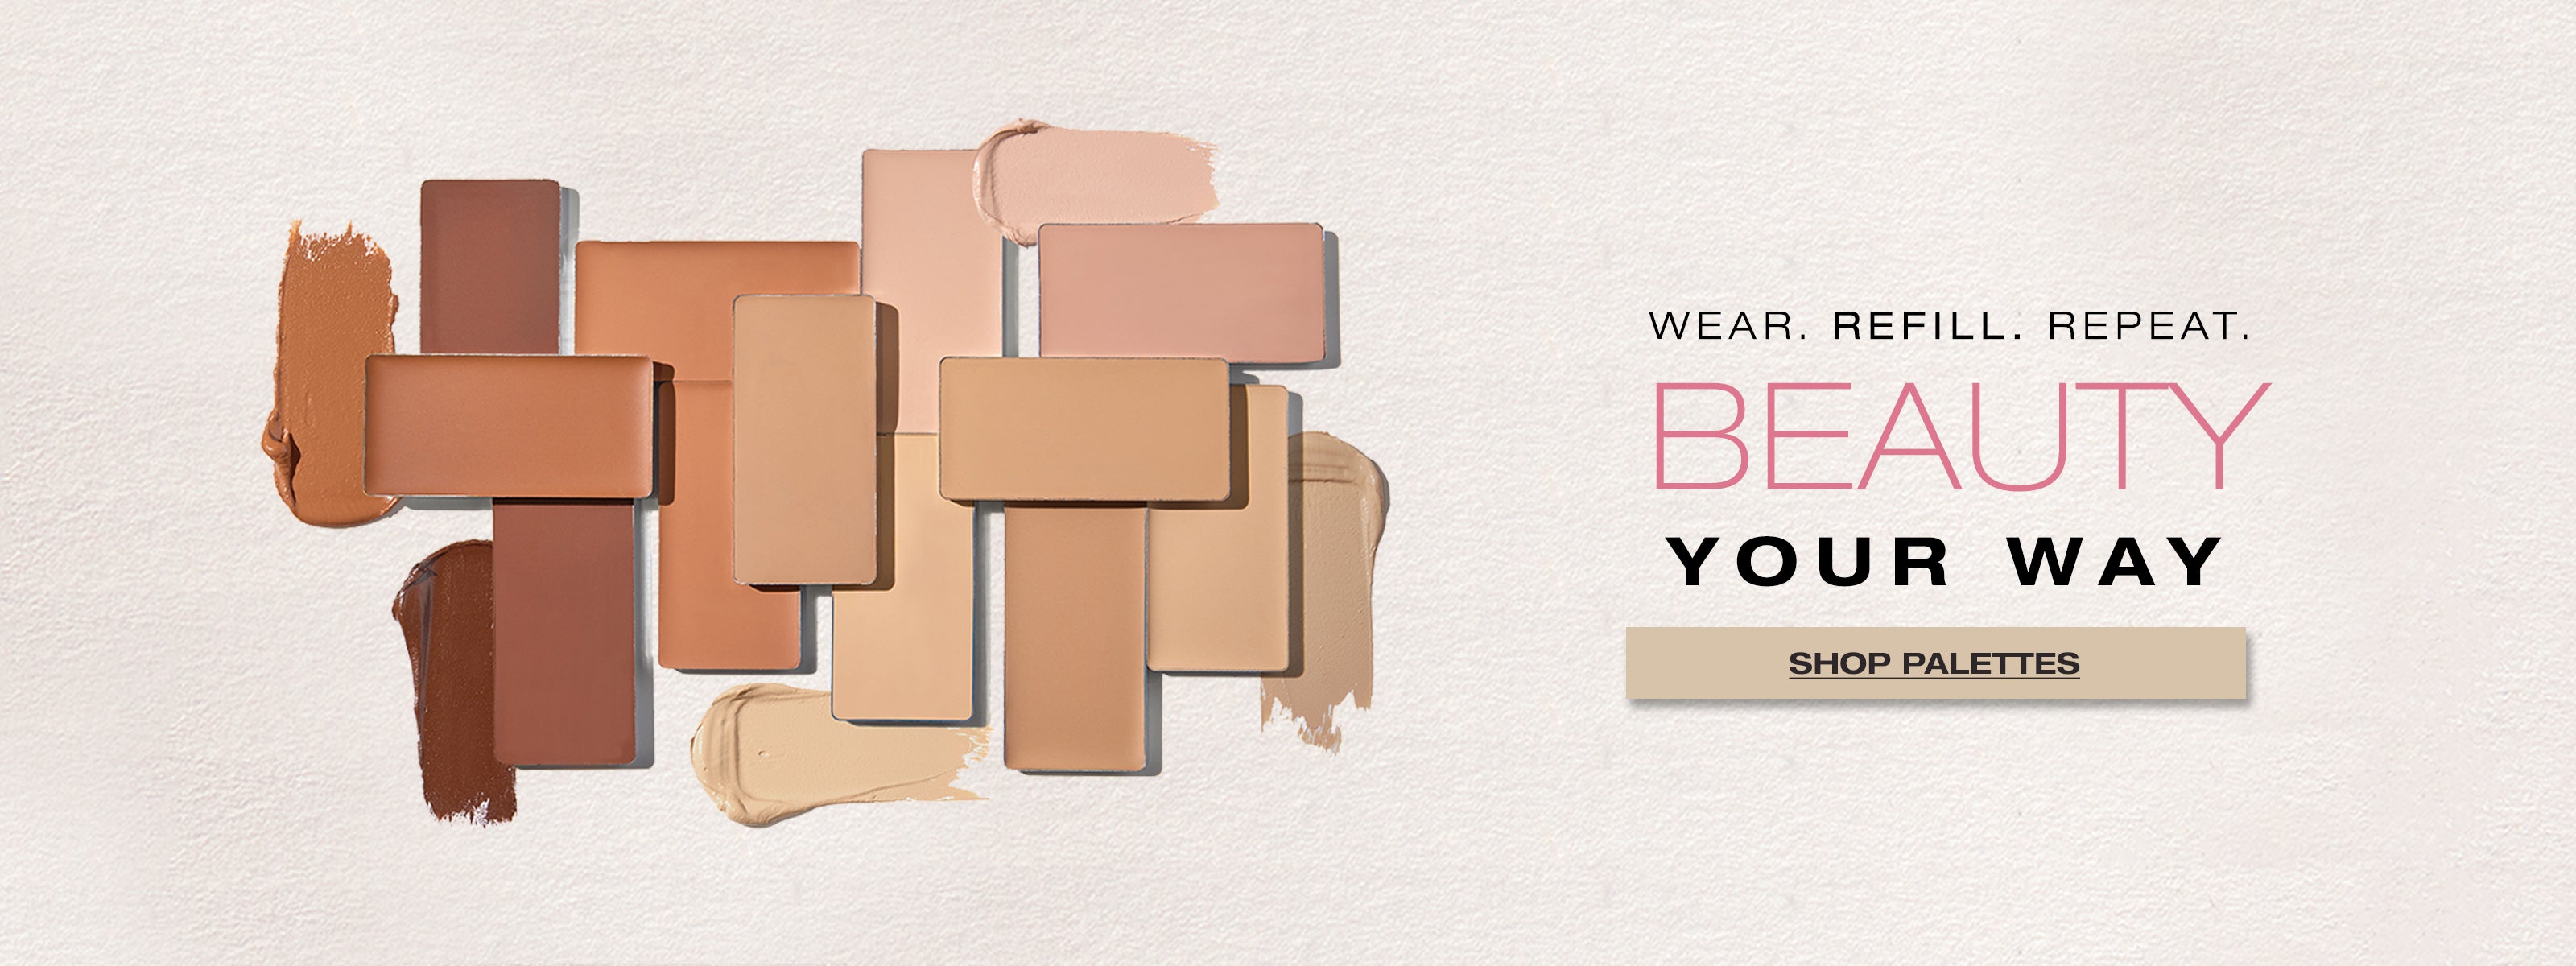 Wear. Refill. Repeat. Beauty Your Way! Shop Our Refillable Makeup Palettes. They are 100% clean, vegan, and easier than ever to customize so you never run out of your favorite products.